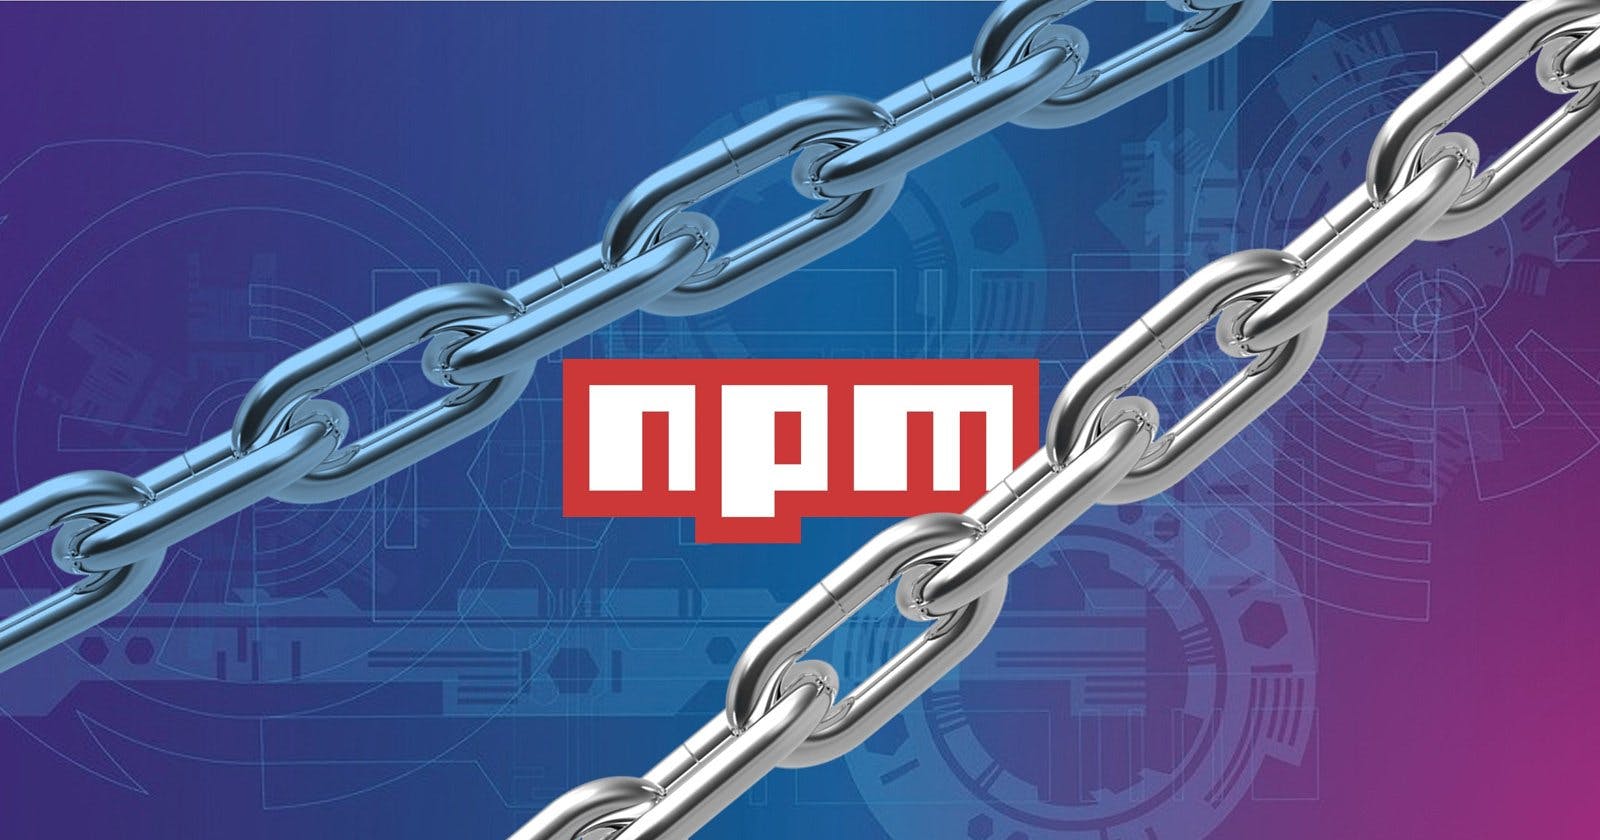 Securing Your npm Projects: 10 Essential Best Practices for npm Security